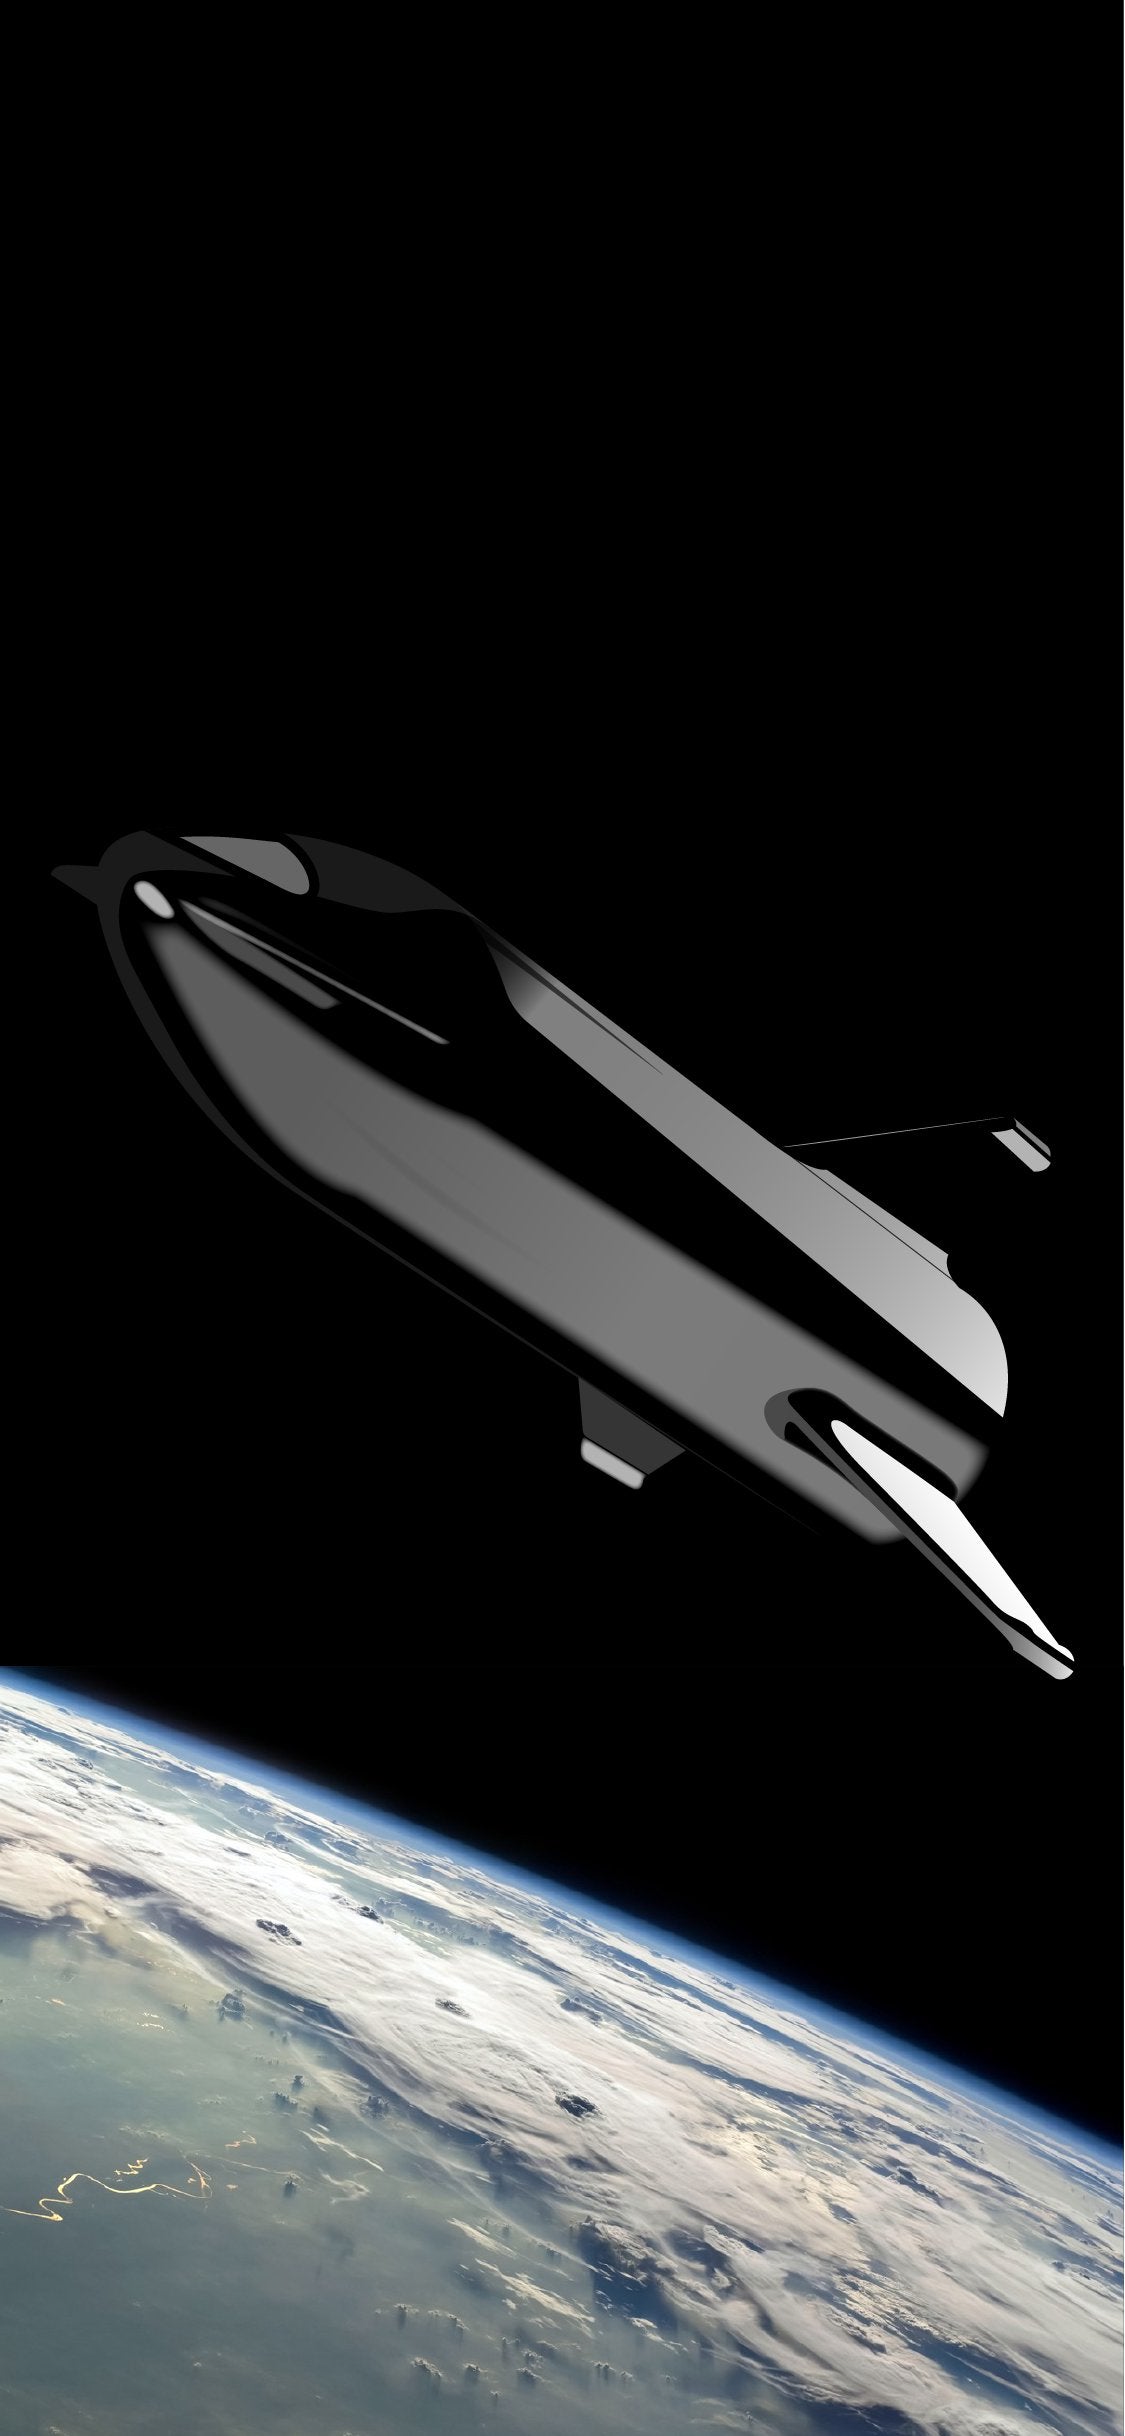 2K Mobile (iPhone X) Starship Wallpaper: SpaceXLounge